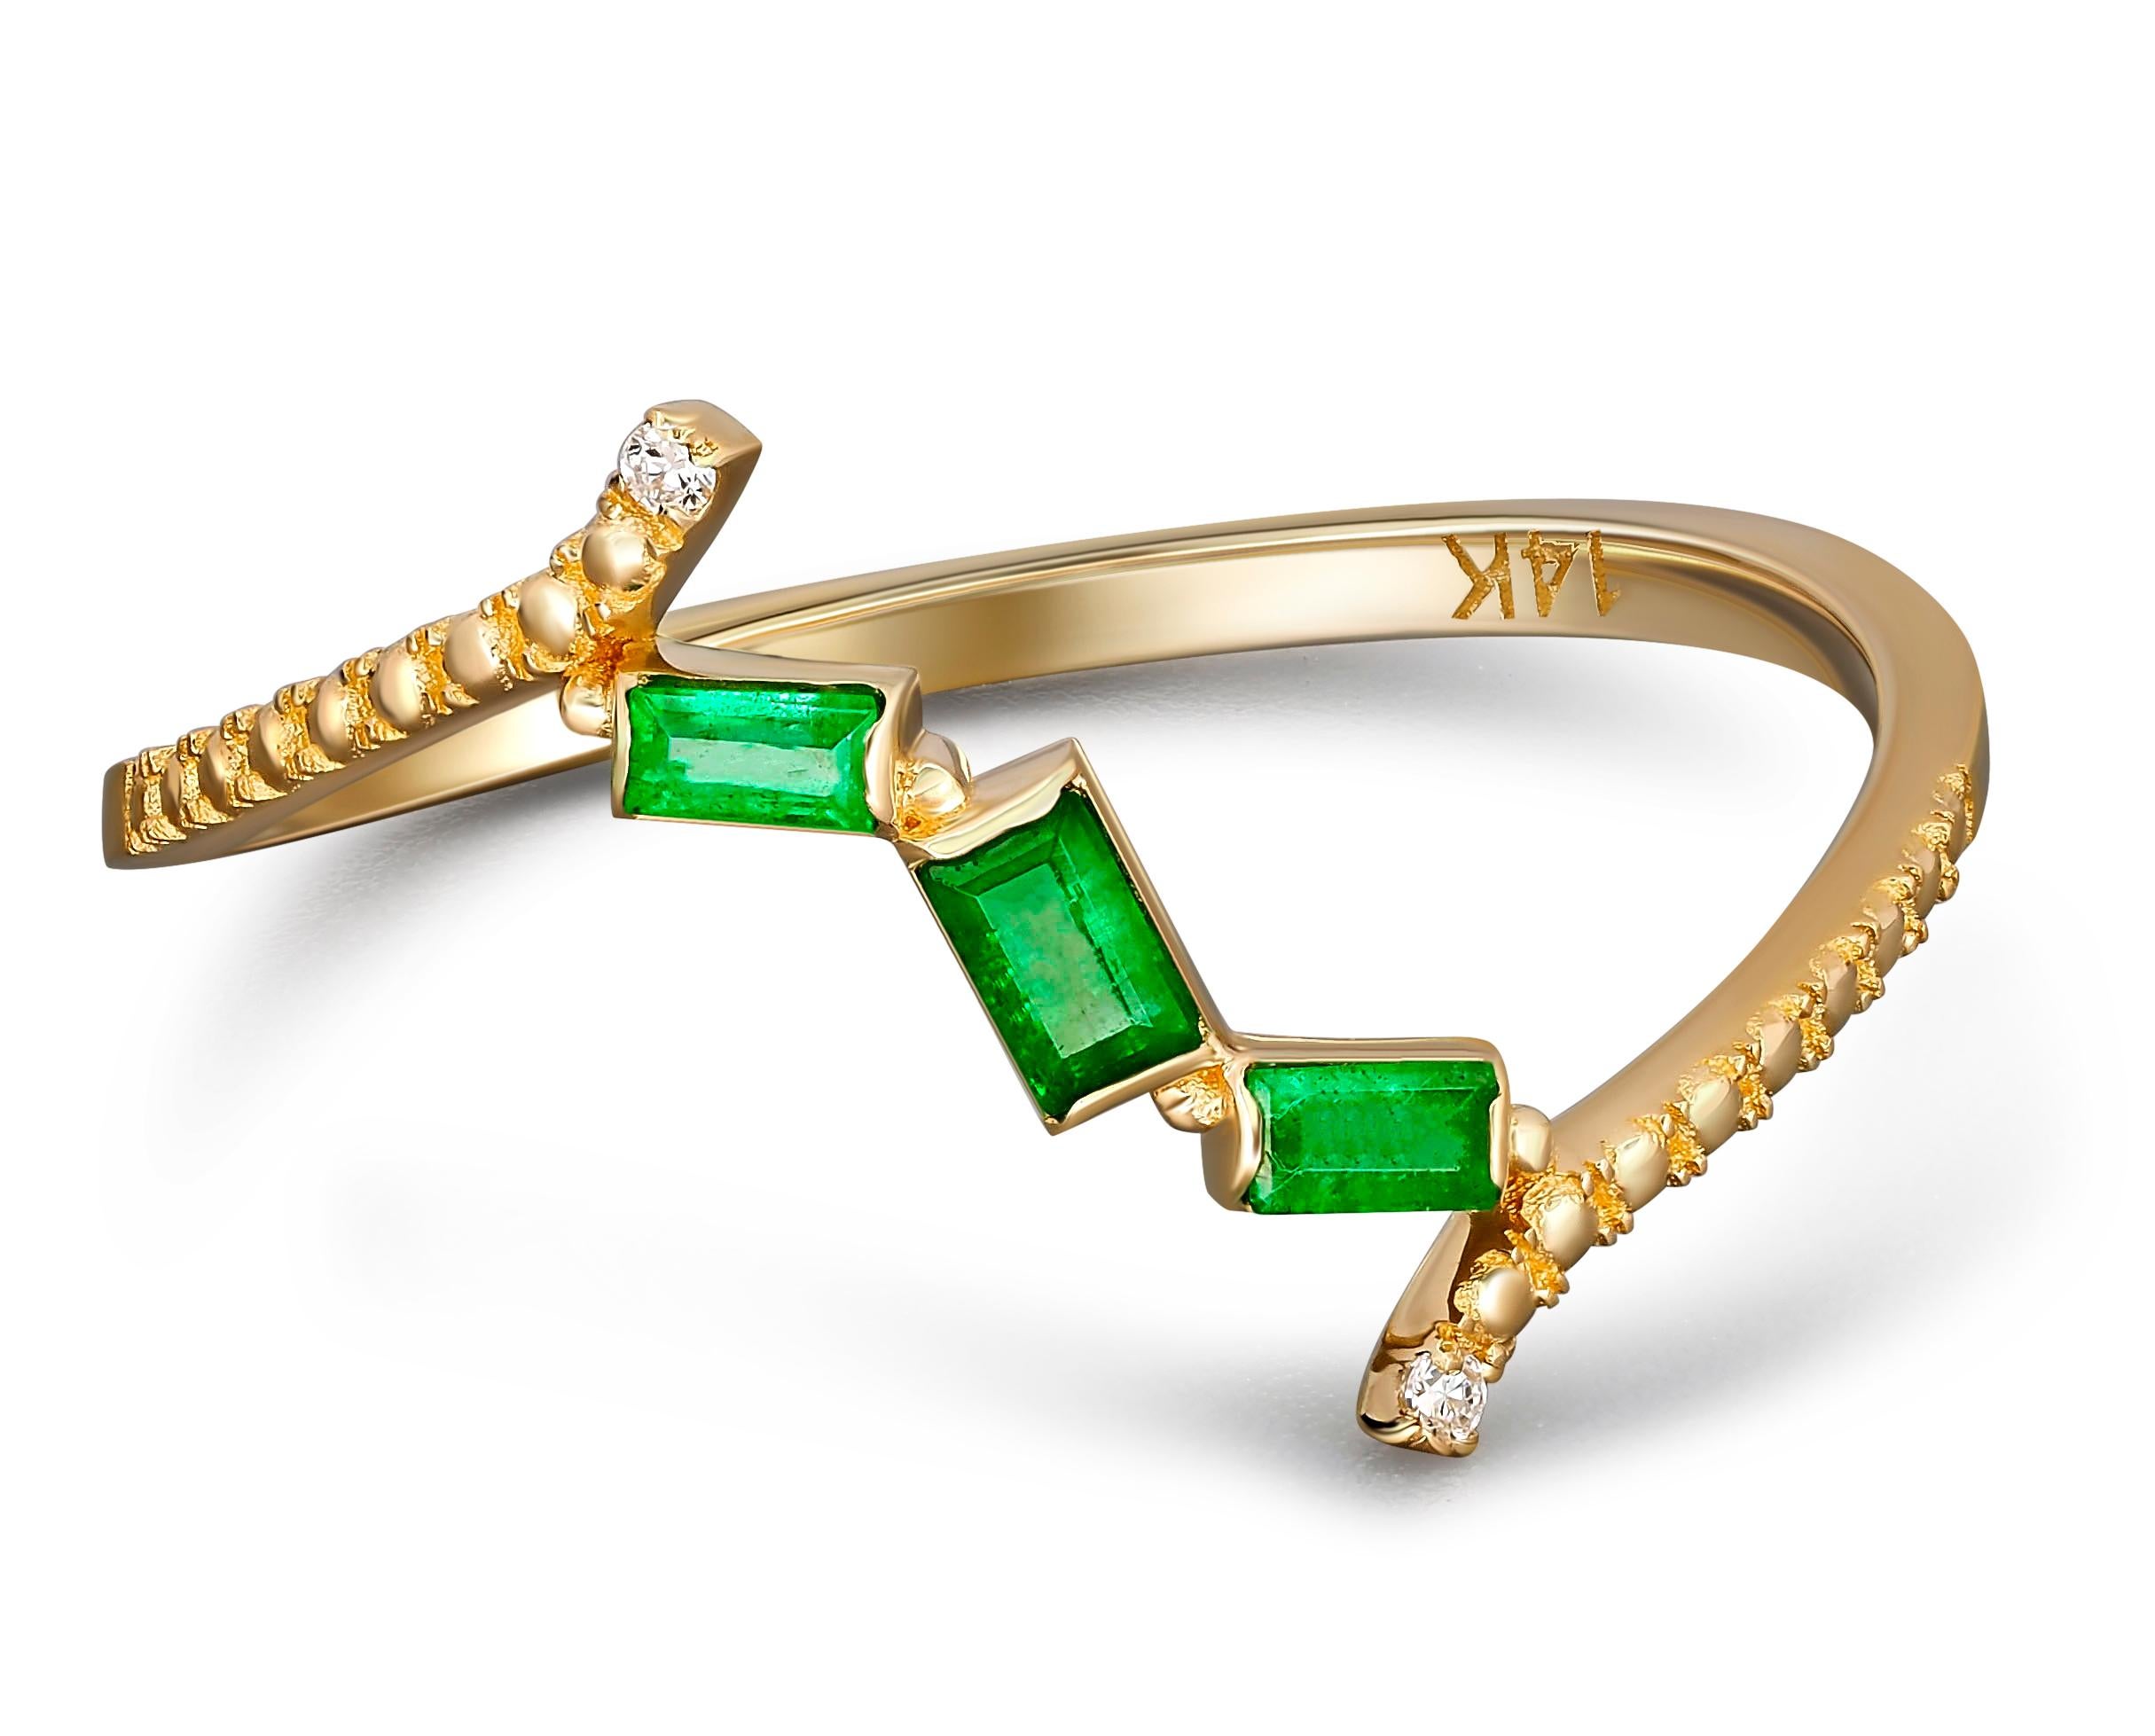 Baguette emerald 14k gold ring. 
Minimalist emerald ring. 3 gemstone ring. Delicate emerald ring. May Birthstone Ring. Casual emerald ring.

Metal: 14k gold
Weight: 1.3 g. depends from size.

Central stone: Emeralds - 3 pieces
Cut: Baguette
Weight: